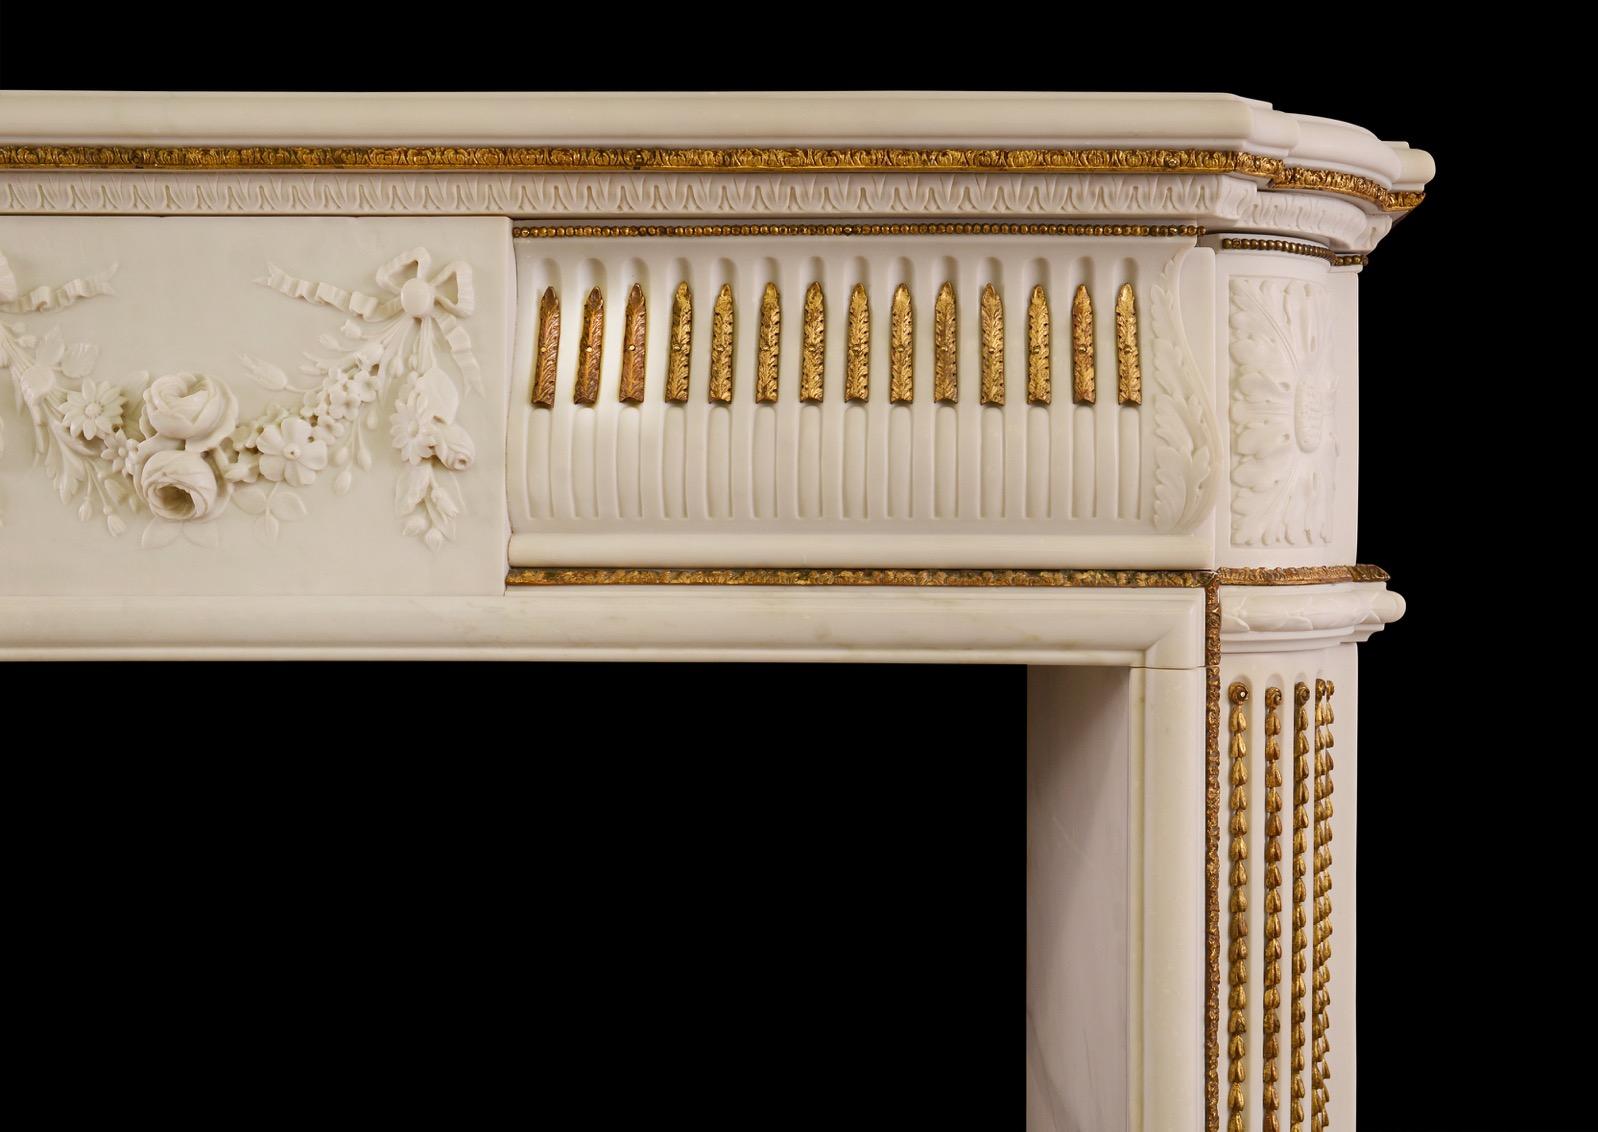 A good quality period Regency fireplace in statuary white marble, with adorned brass ormolu enrichments. The frieze with finely carved centre blocking of tied swags, ribbons and flowers, flanked by stop-fluted frieze with delicate ormolu husks